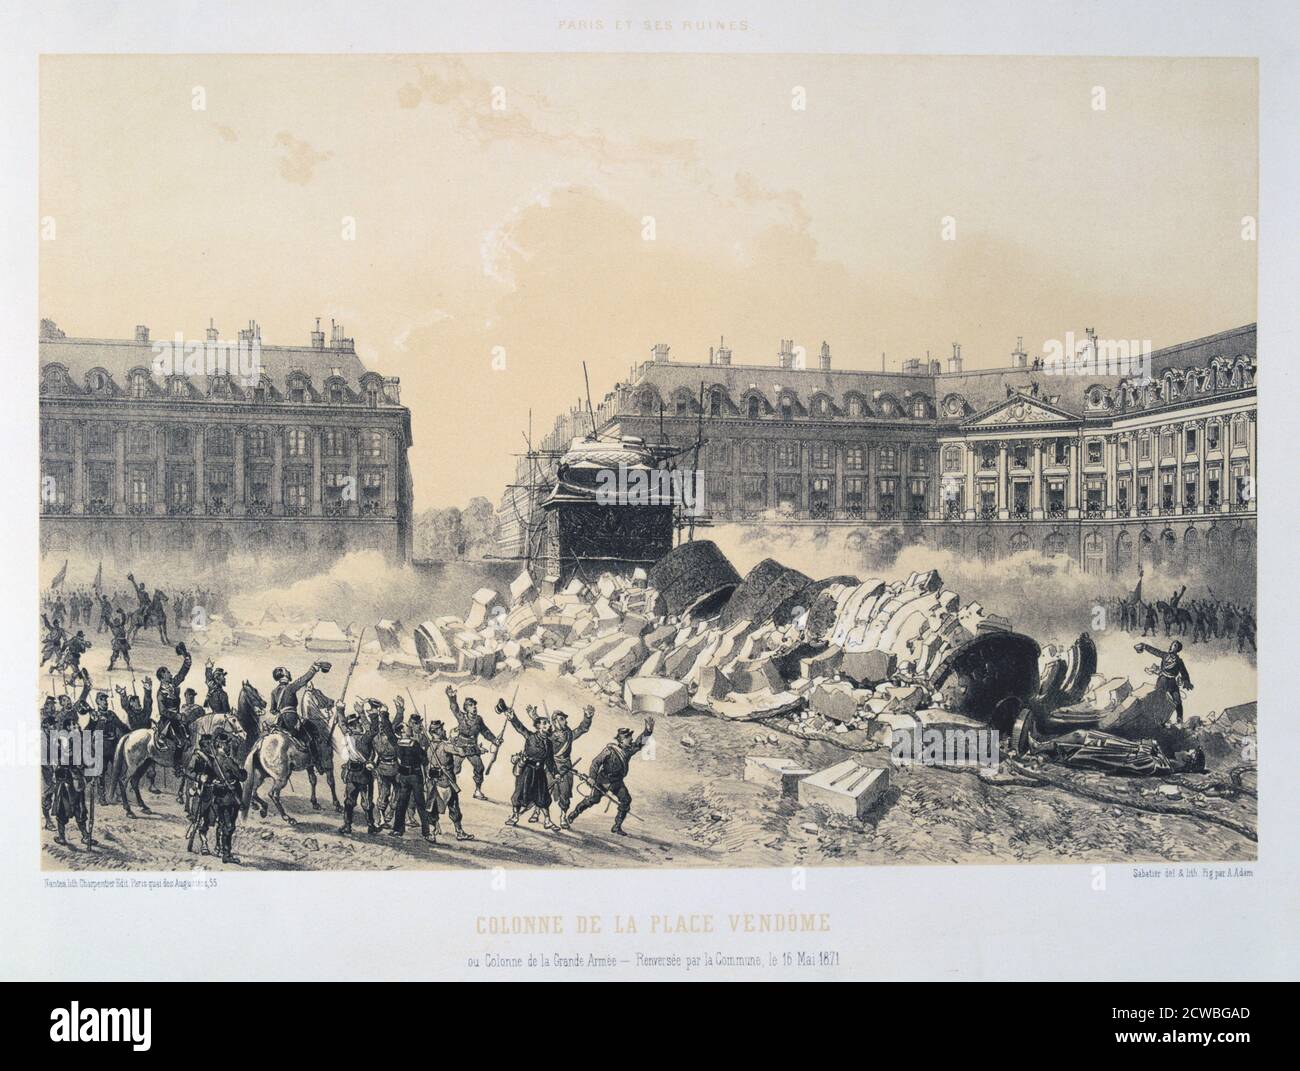 Colonne de la Place Vendome', Paris Commune, 16 May 1871. View of the Place Vendome showing the ruins of the triumphal column erected by Napoleon that the Communards demolished due to its imperialist symbolism. From a series titled Paris et ses Ruines. From a private collection. Stock Photo